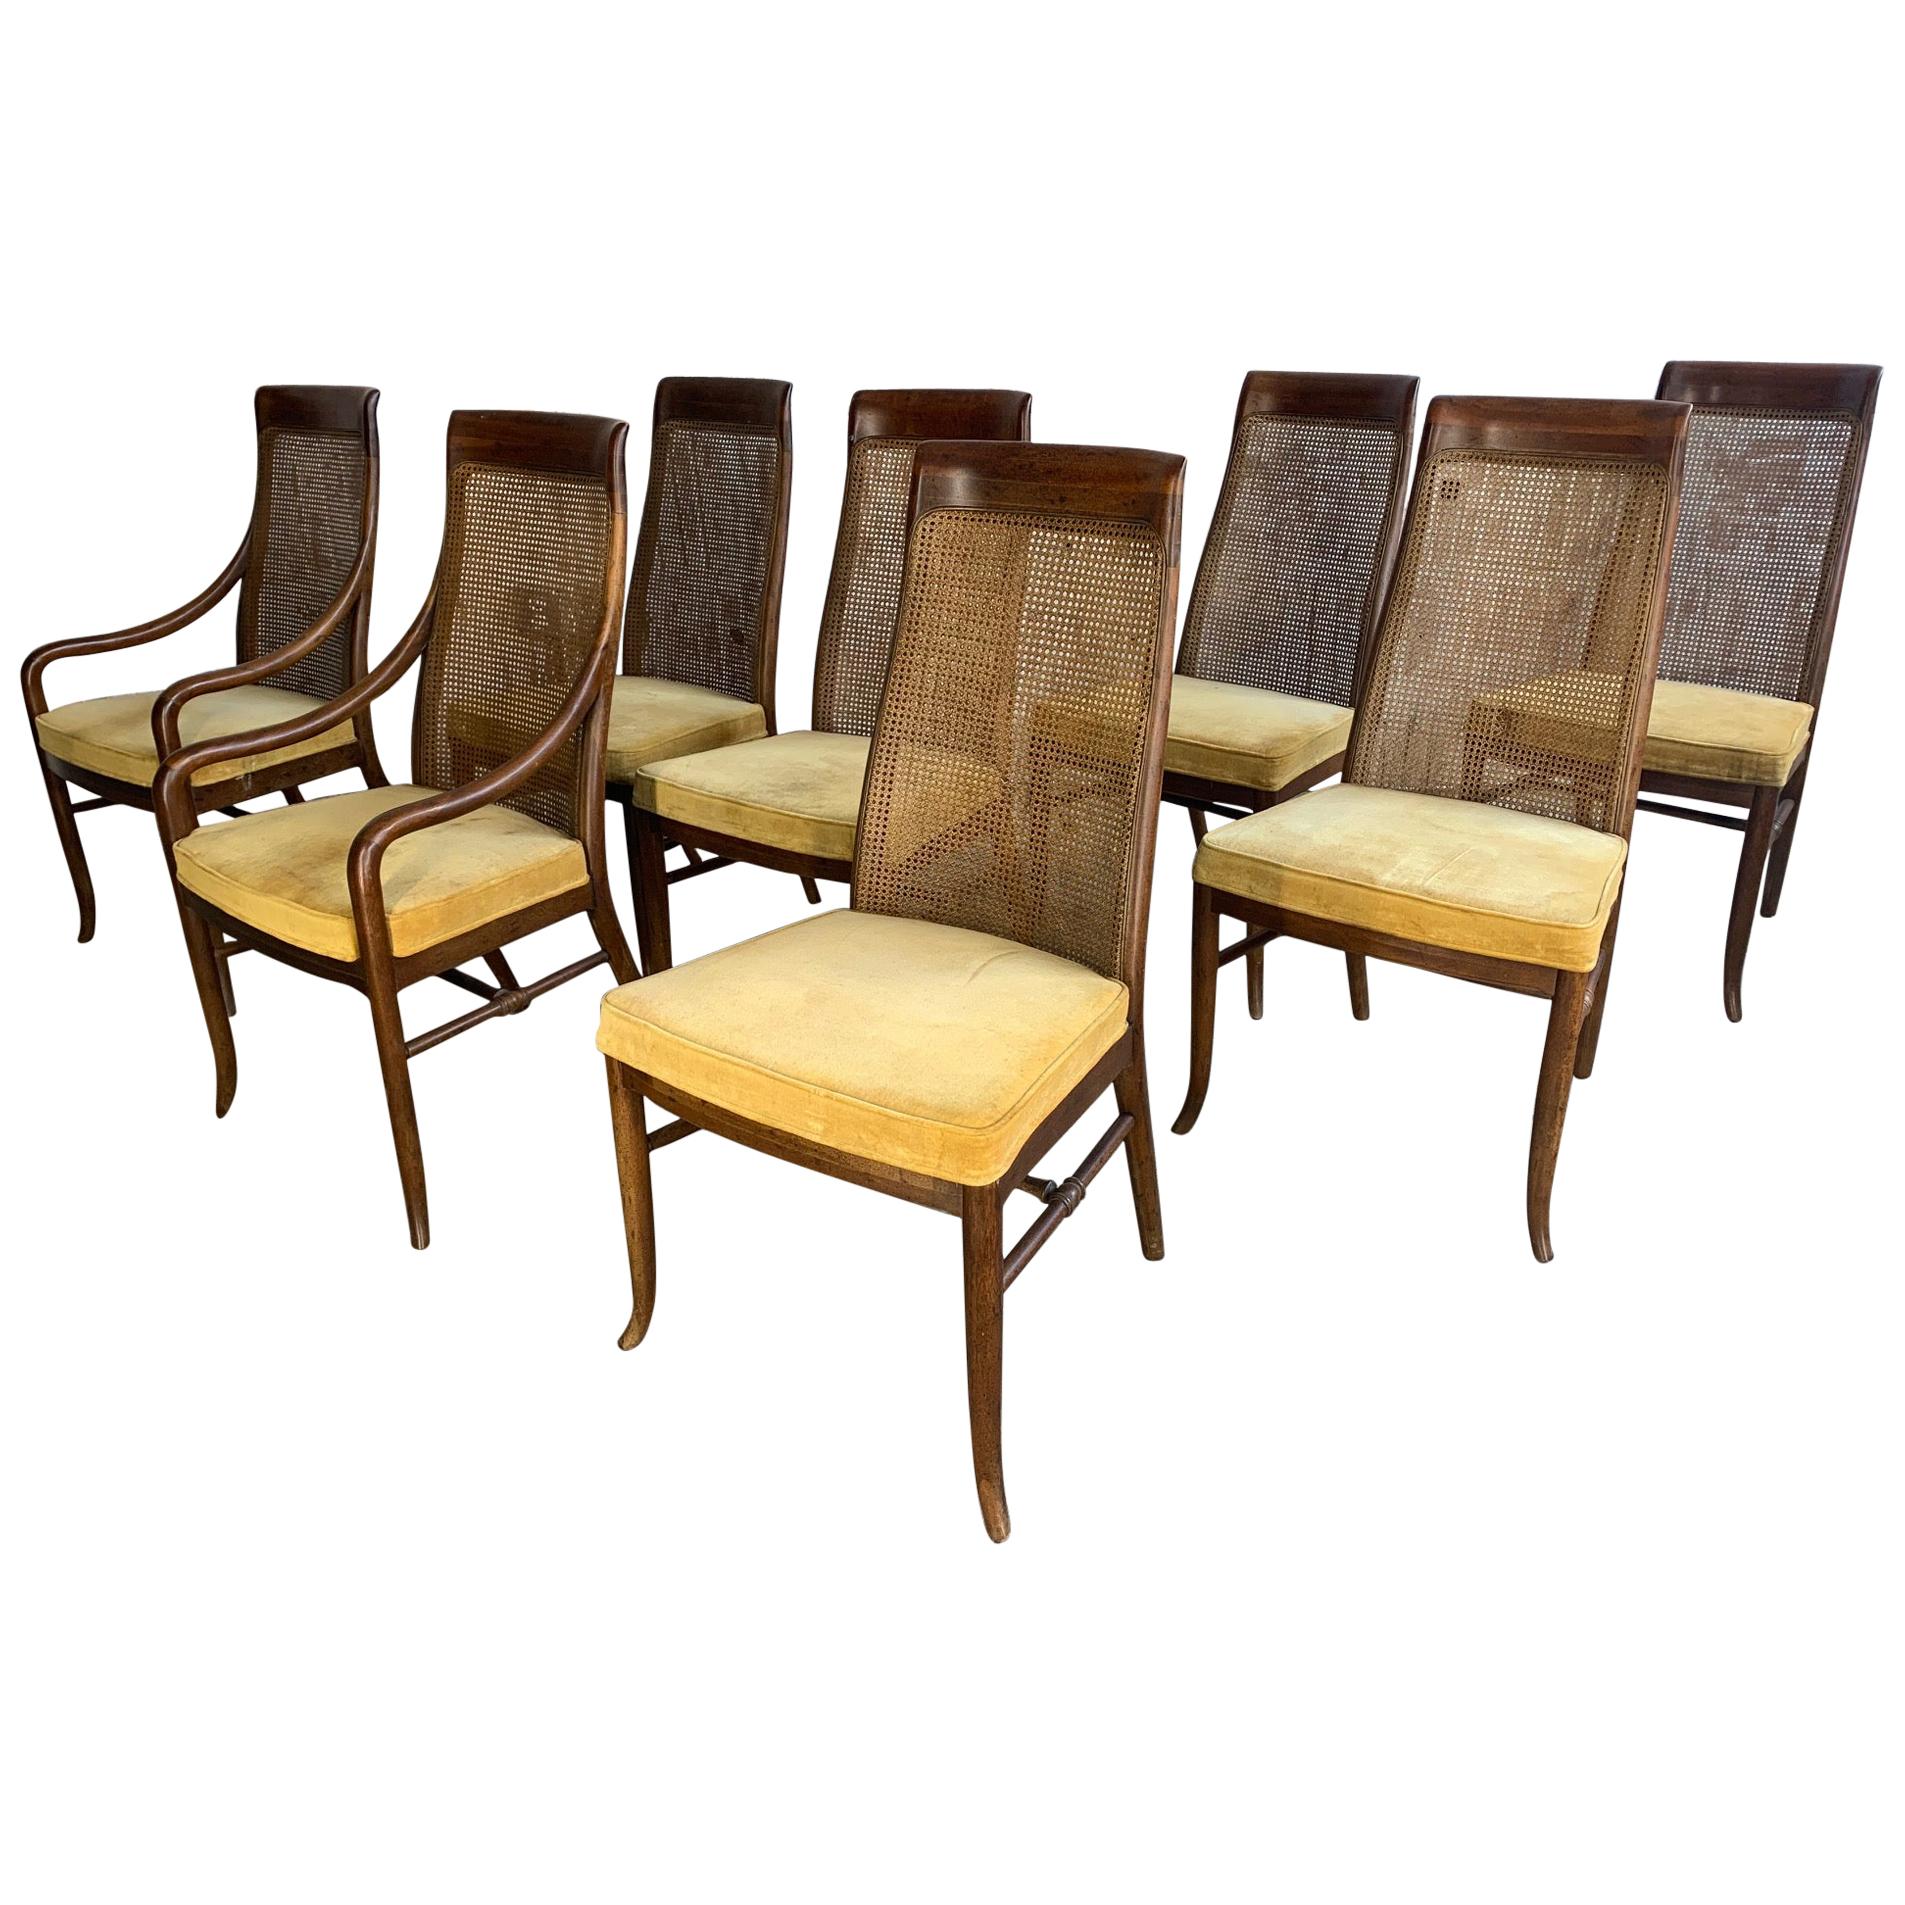 Midcentury High Back Cane Dining Chairs by Drexel